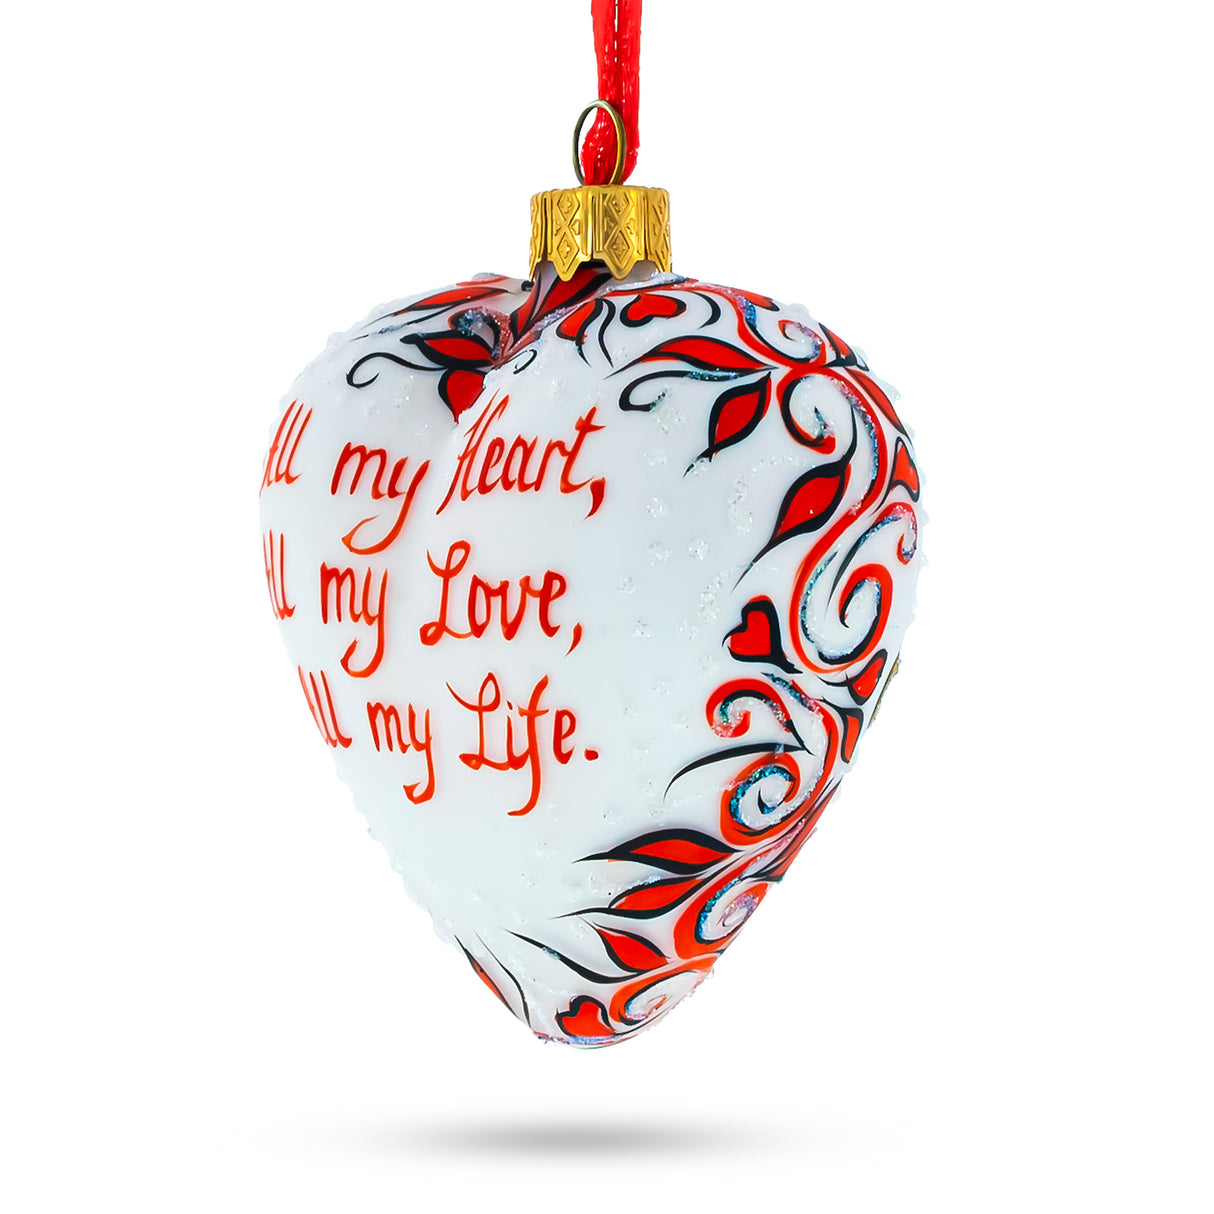 BestPysanky online gift shop sells heart mouth blown hand made painted xmas decor decorations figurine unique luxury collectible heirloom vintage whimsical elegant festive balls baubles old fashioned european german collection artisan hanging pendants personalized